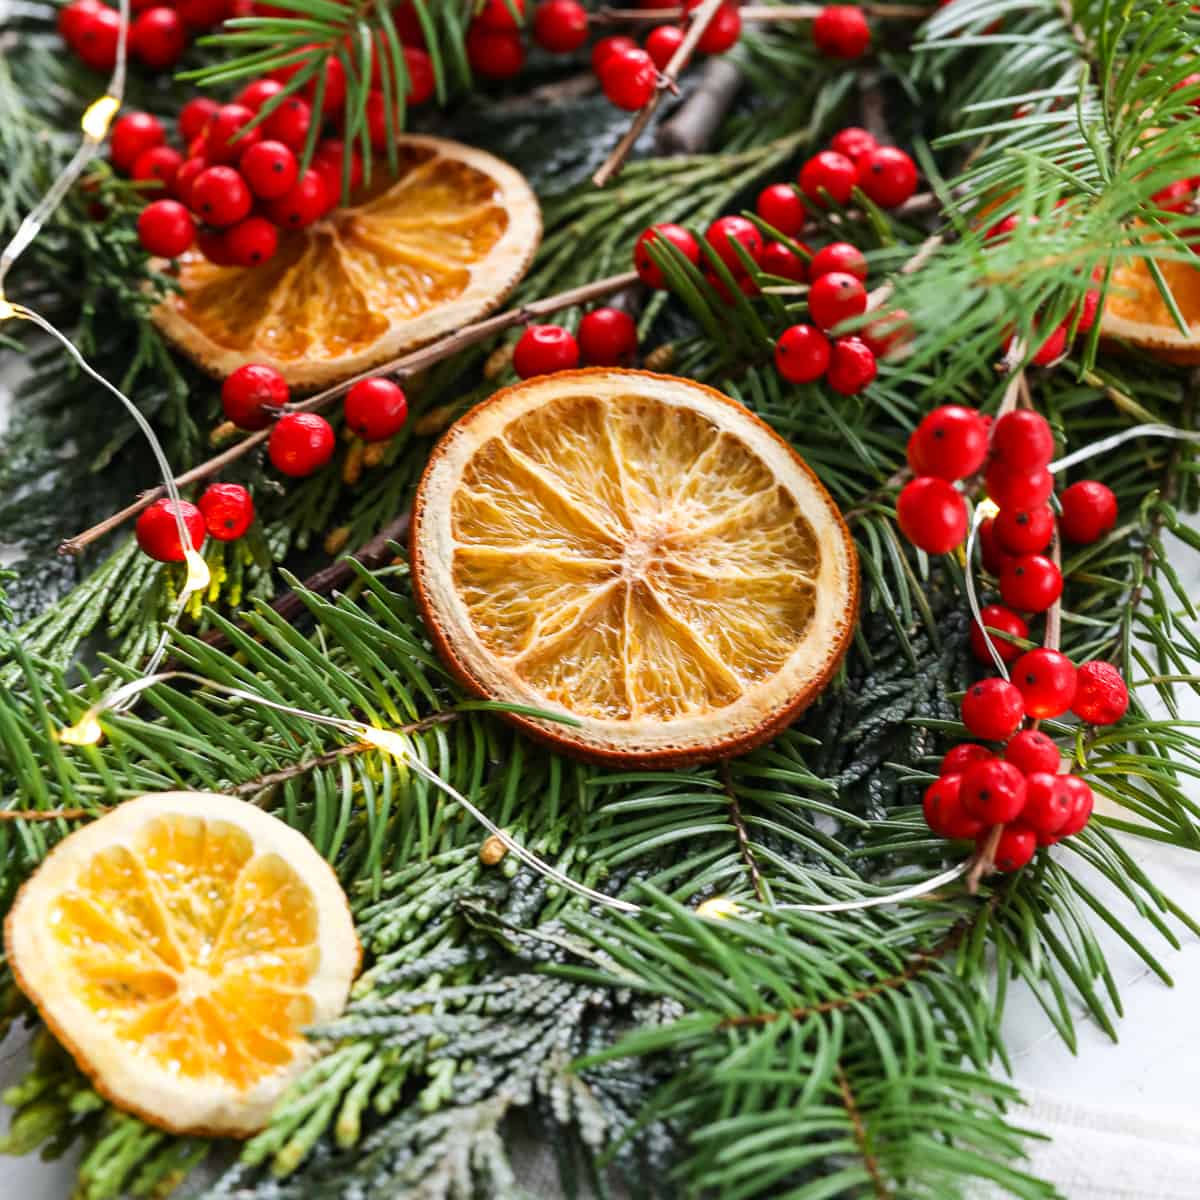 Showing how to make homemade dried orange slices on a sheet pan for holiday decorations.